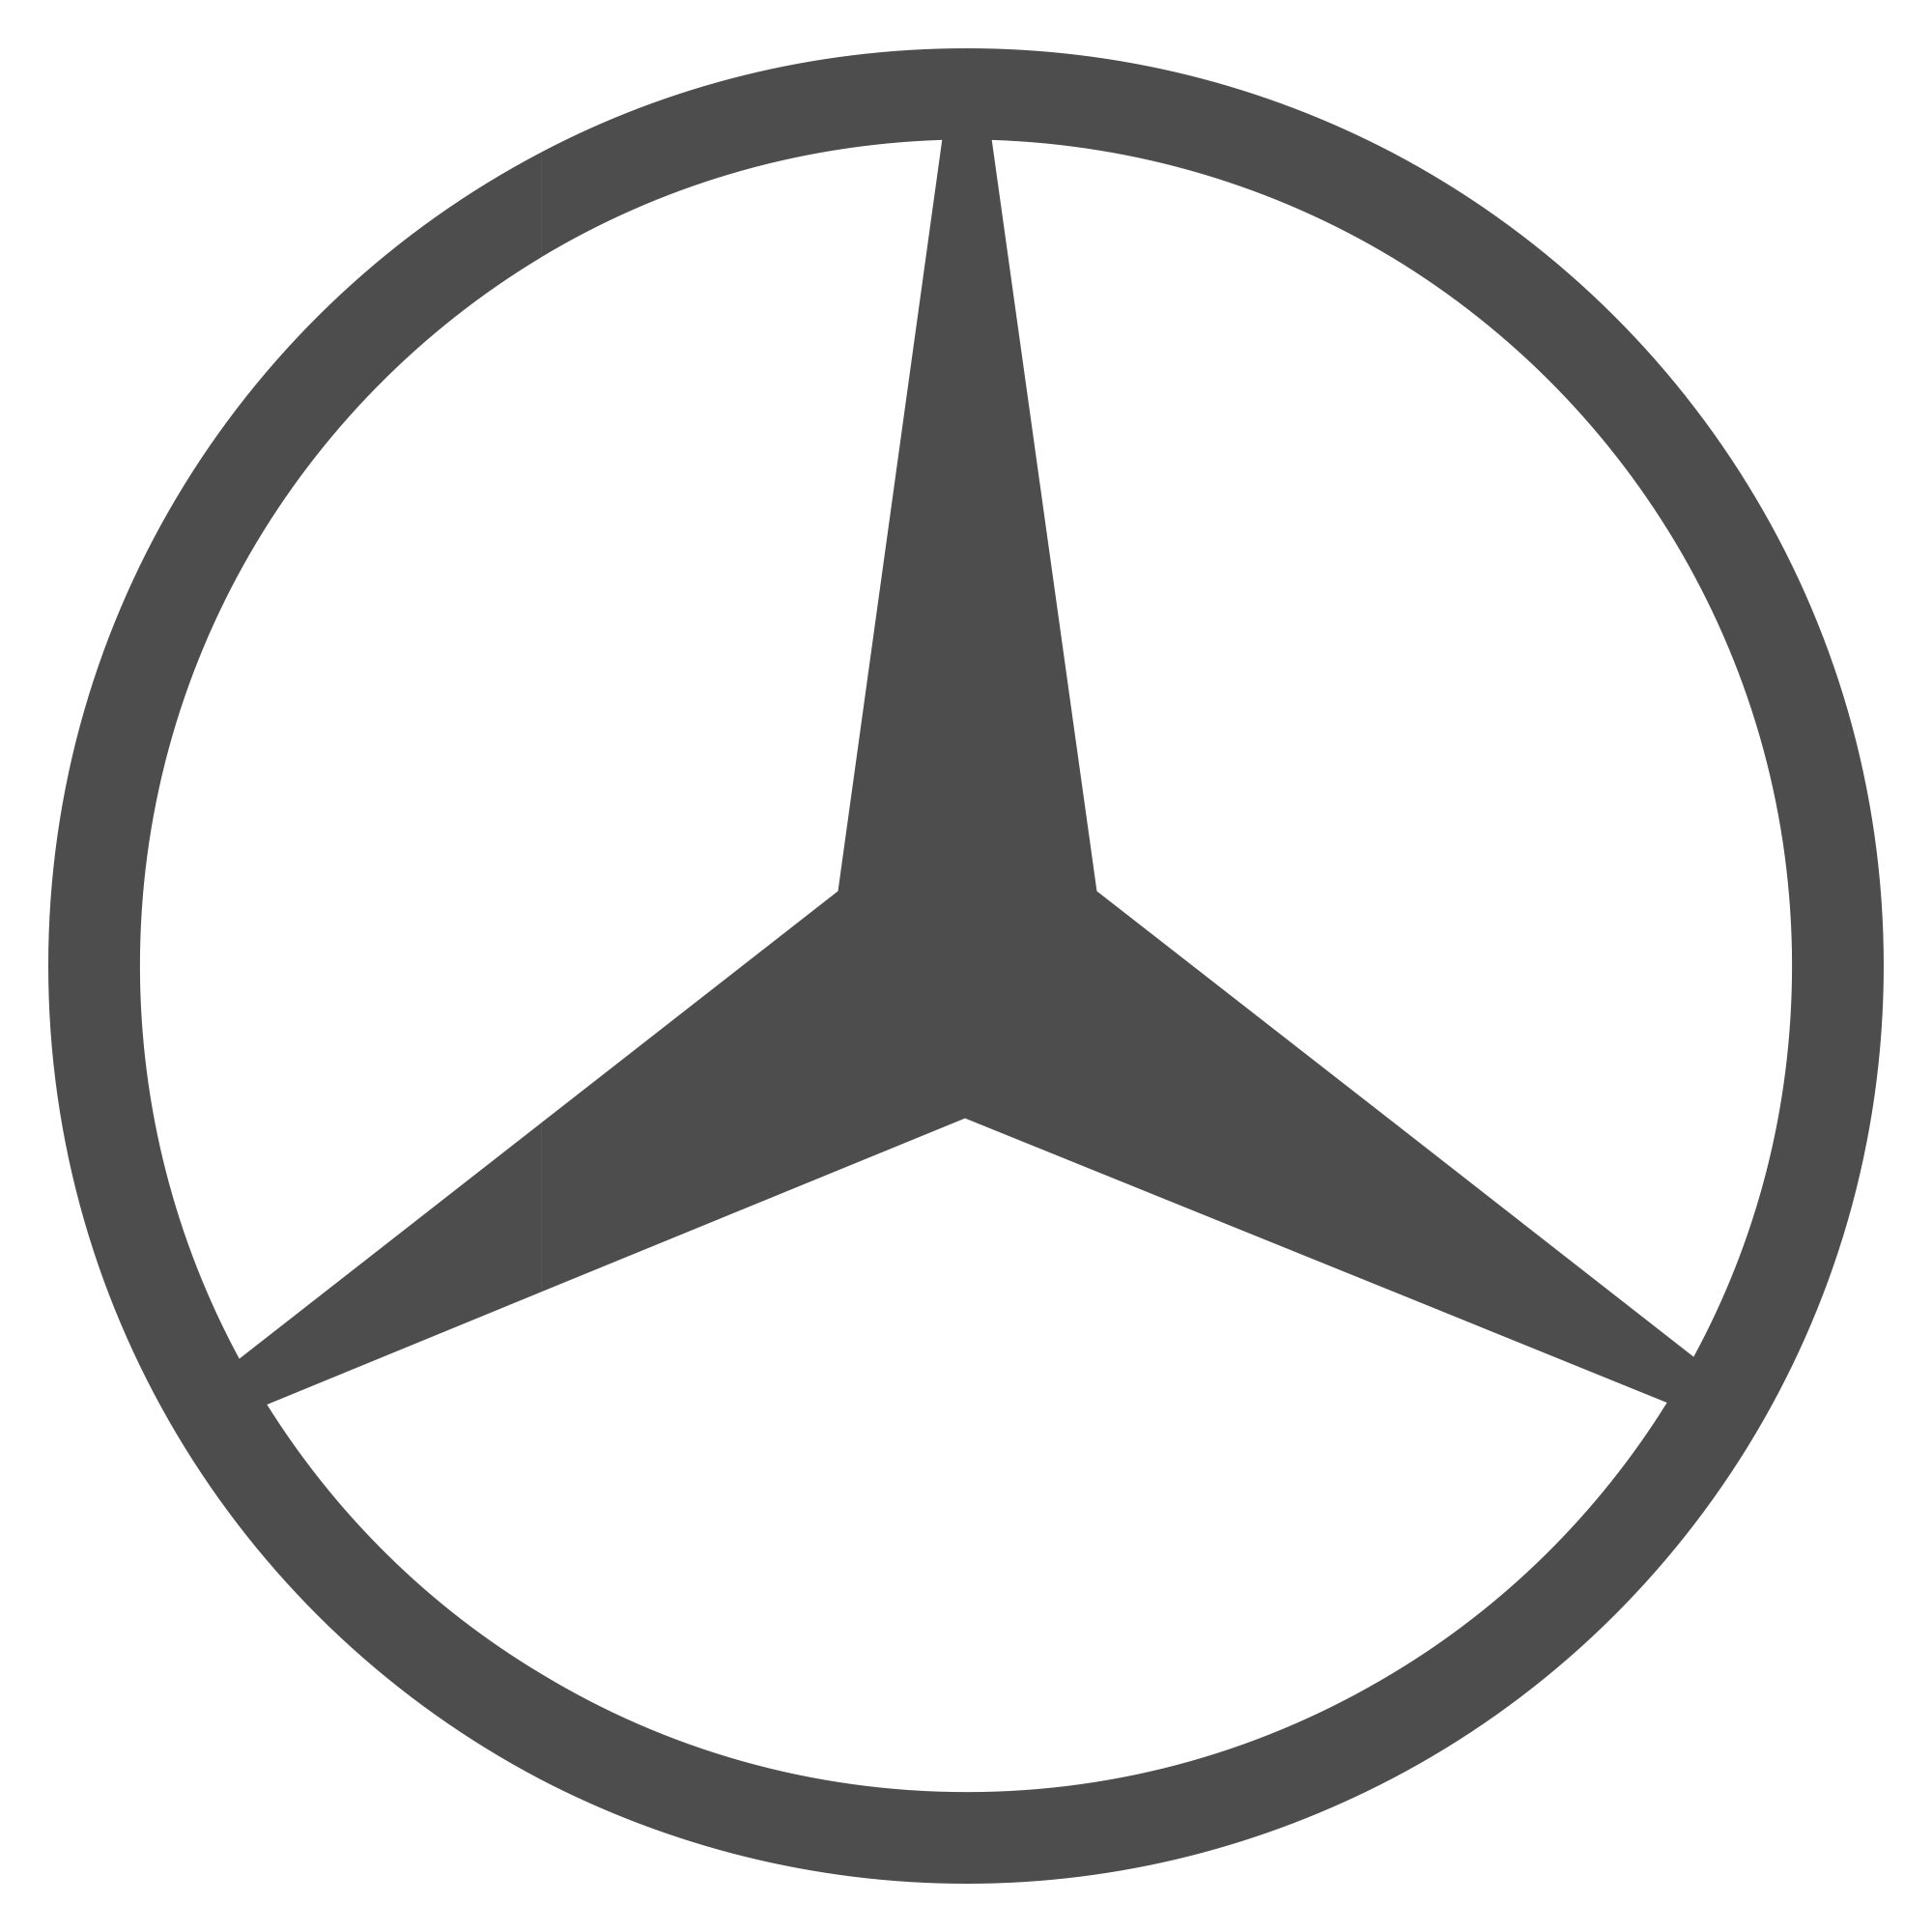 File:Mercedes-Benz free logo.svg - Wikimedia Commons